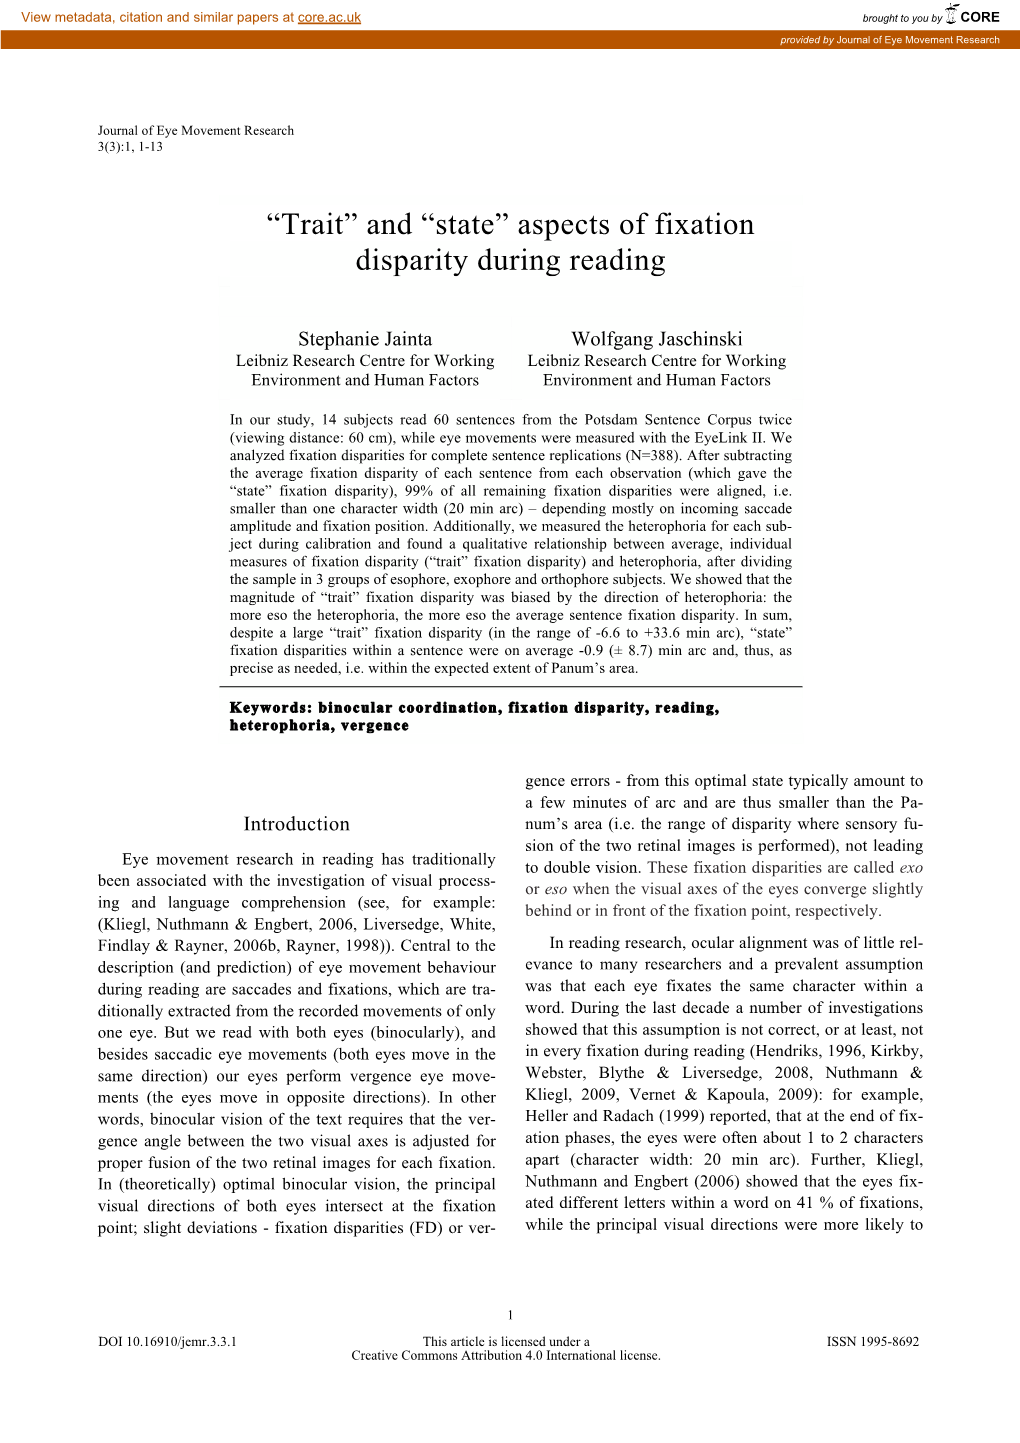 Aspects of Fixation Disparity During Reading